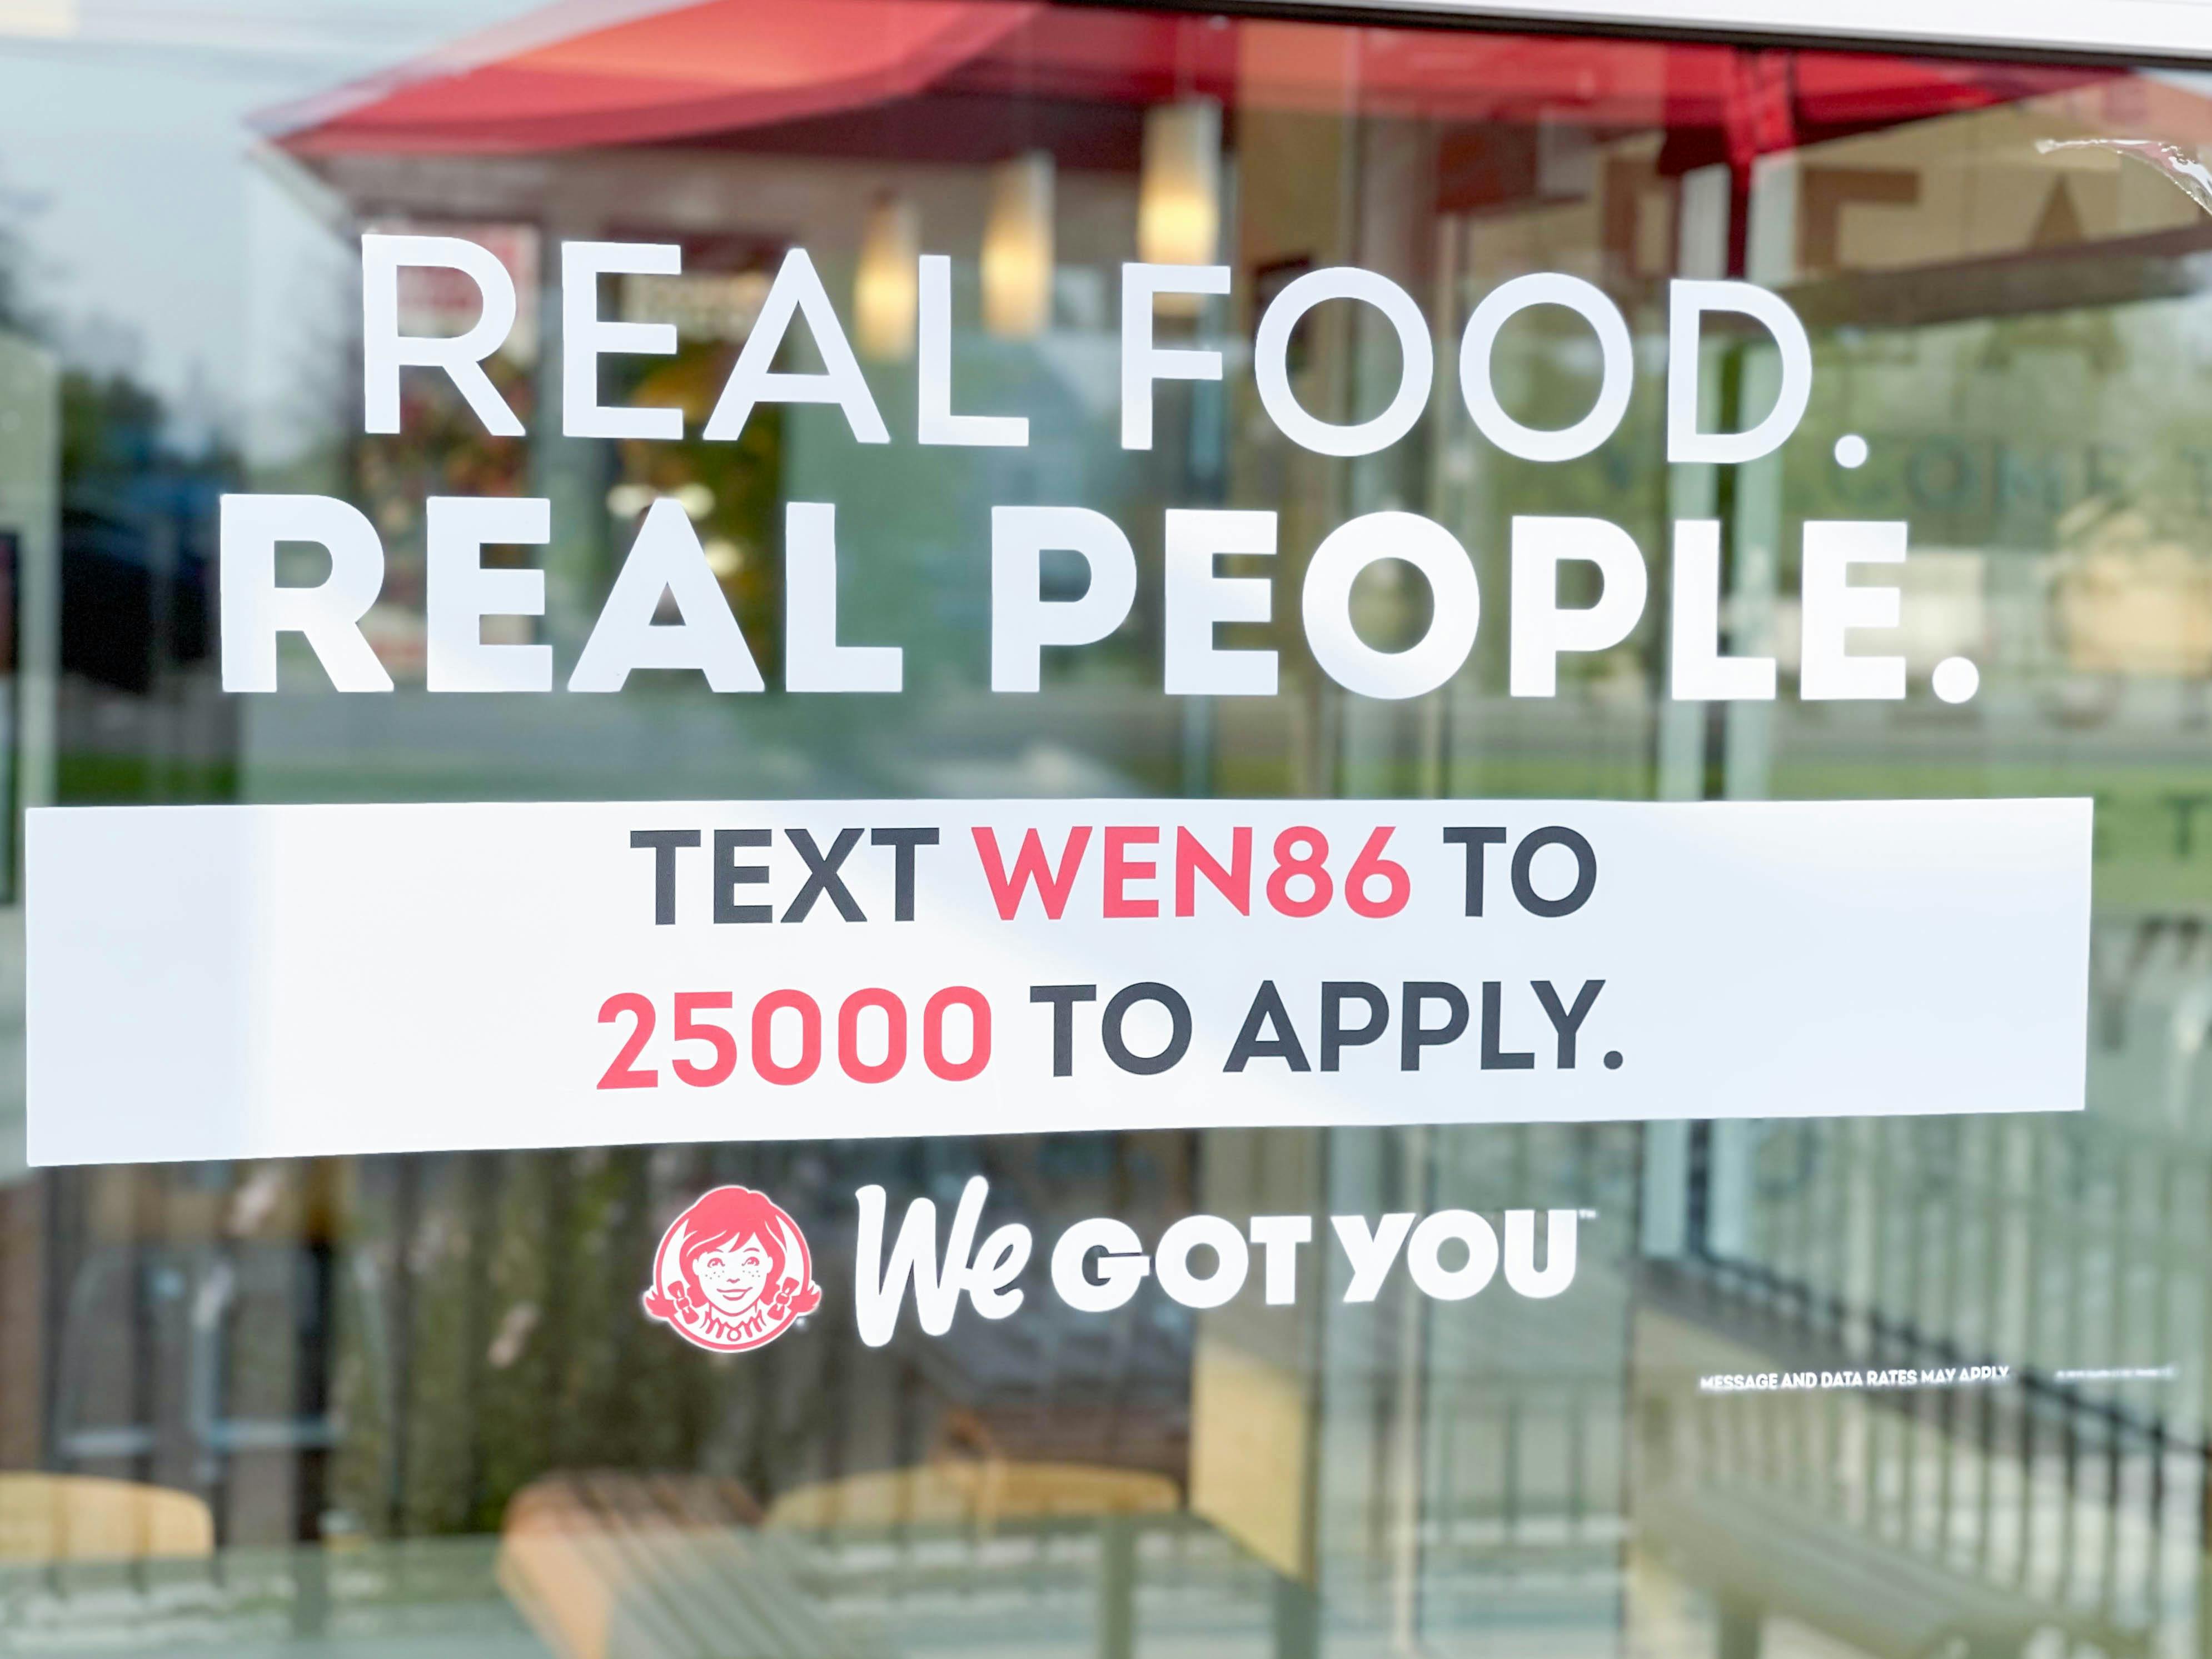 A window cling in a Wendy's window that reads, "Real Food, Real People. Text WEN86 to 25000 to apply. We got you.